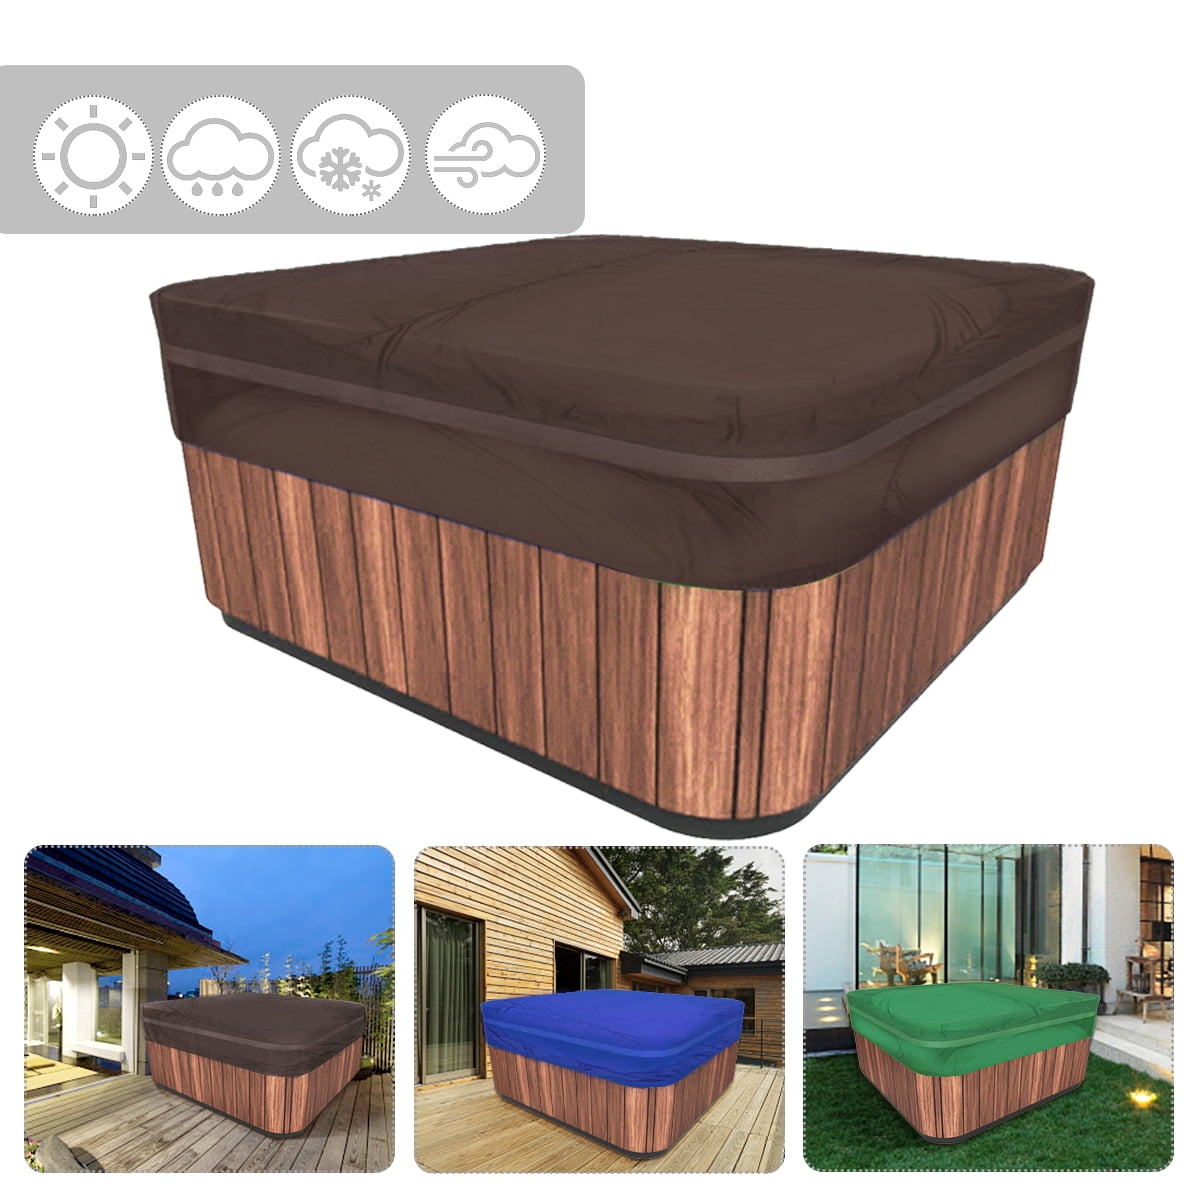 Details about   Square Outdoor Hot Tub Spa Cover Cap Guard Waterproof Dust Protector Weather 